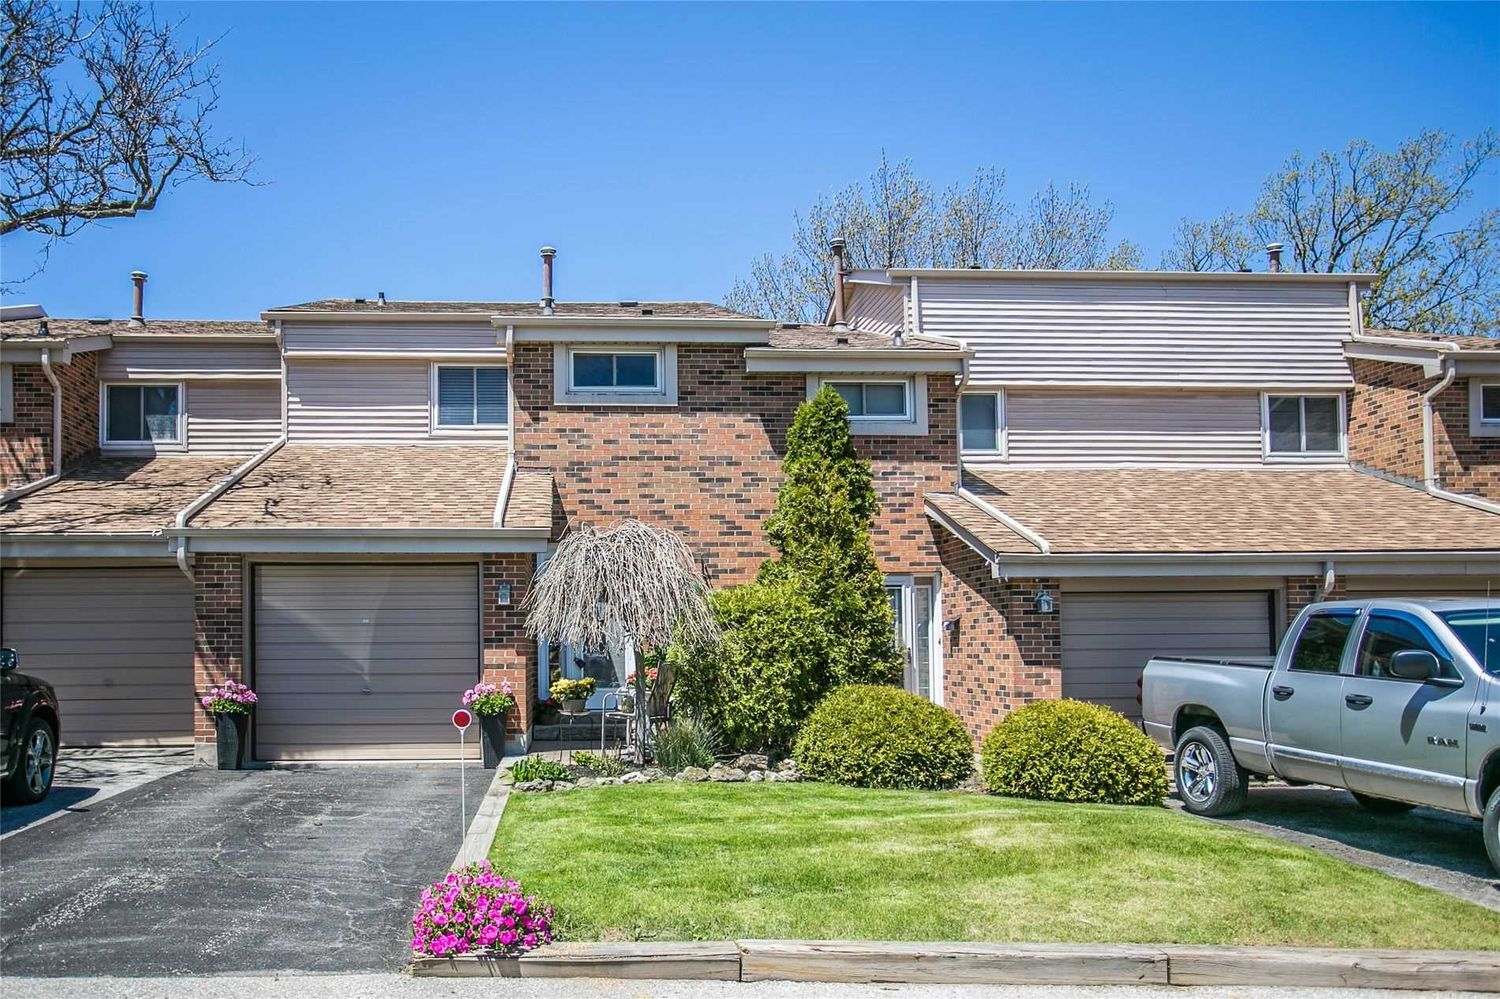 2755 Windwood Drive. 2755 Windwood Drive Townhomes is located in  Mississauga, Toronto - image #1 of 2